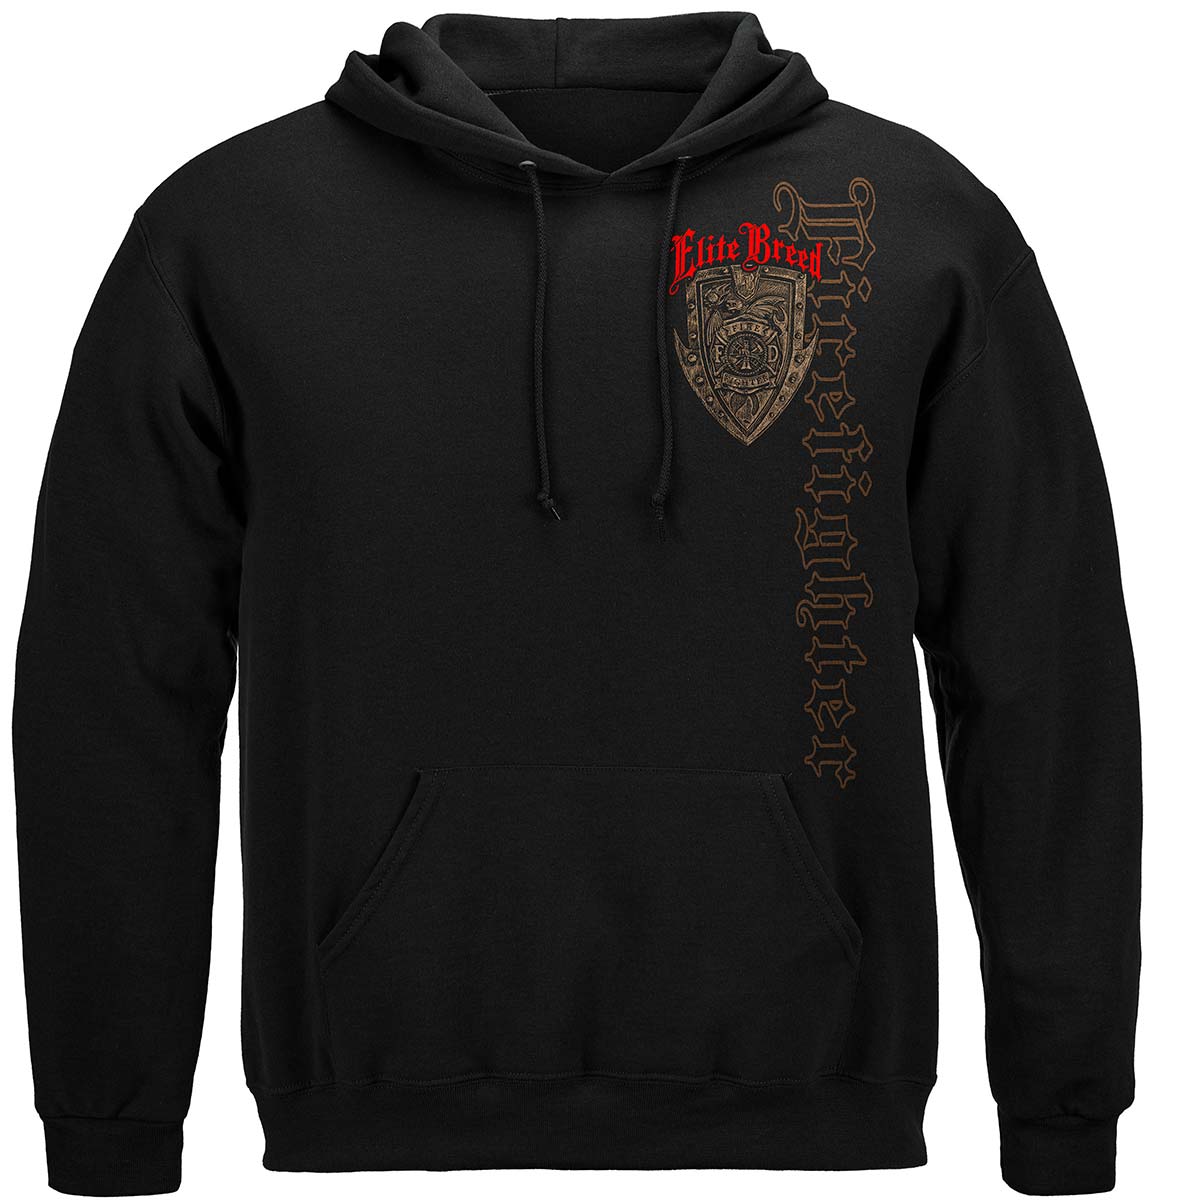 Elite Breed Firefighter Borne Or Your Not Premium Long Sleeves